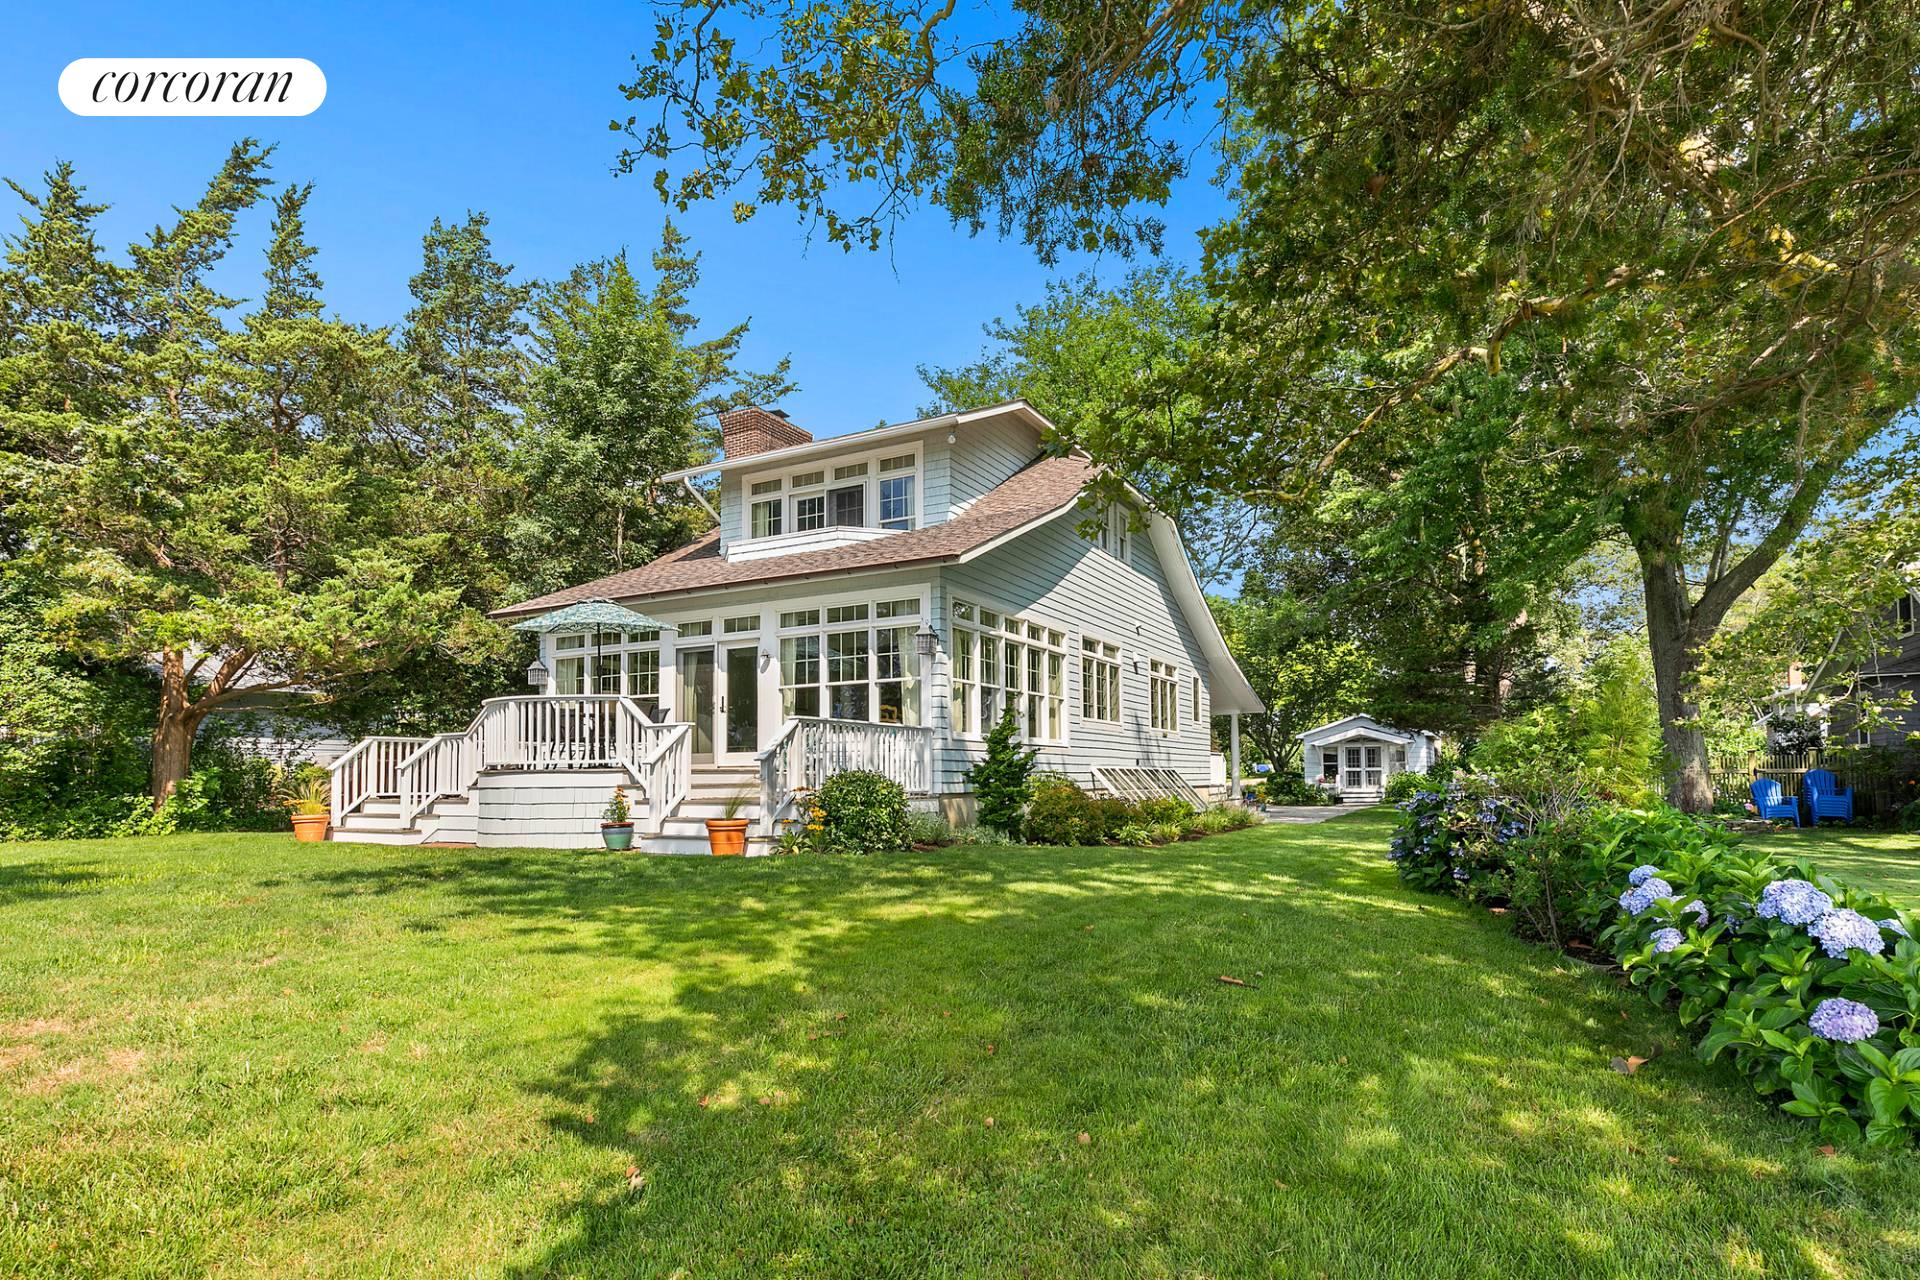 Homes for sale in Laurel | View 760 Great Peconic Bay Blvd | 8 Beds, 7 Baths